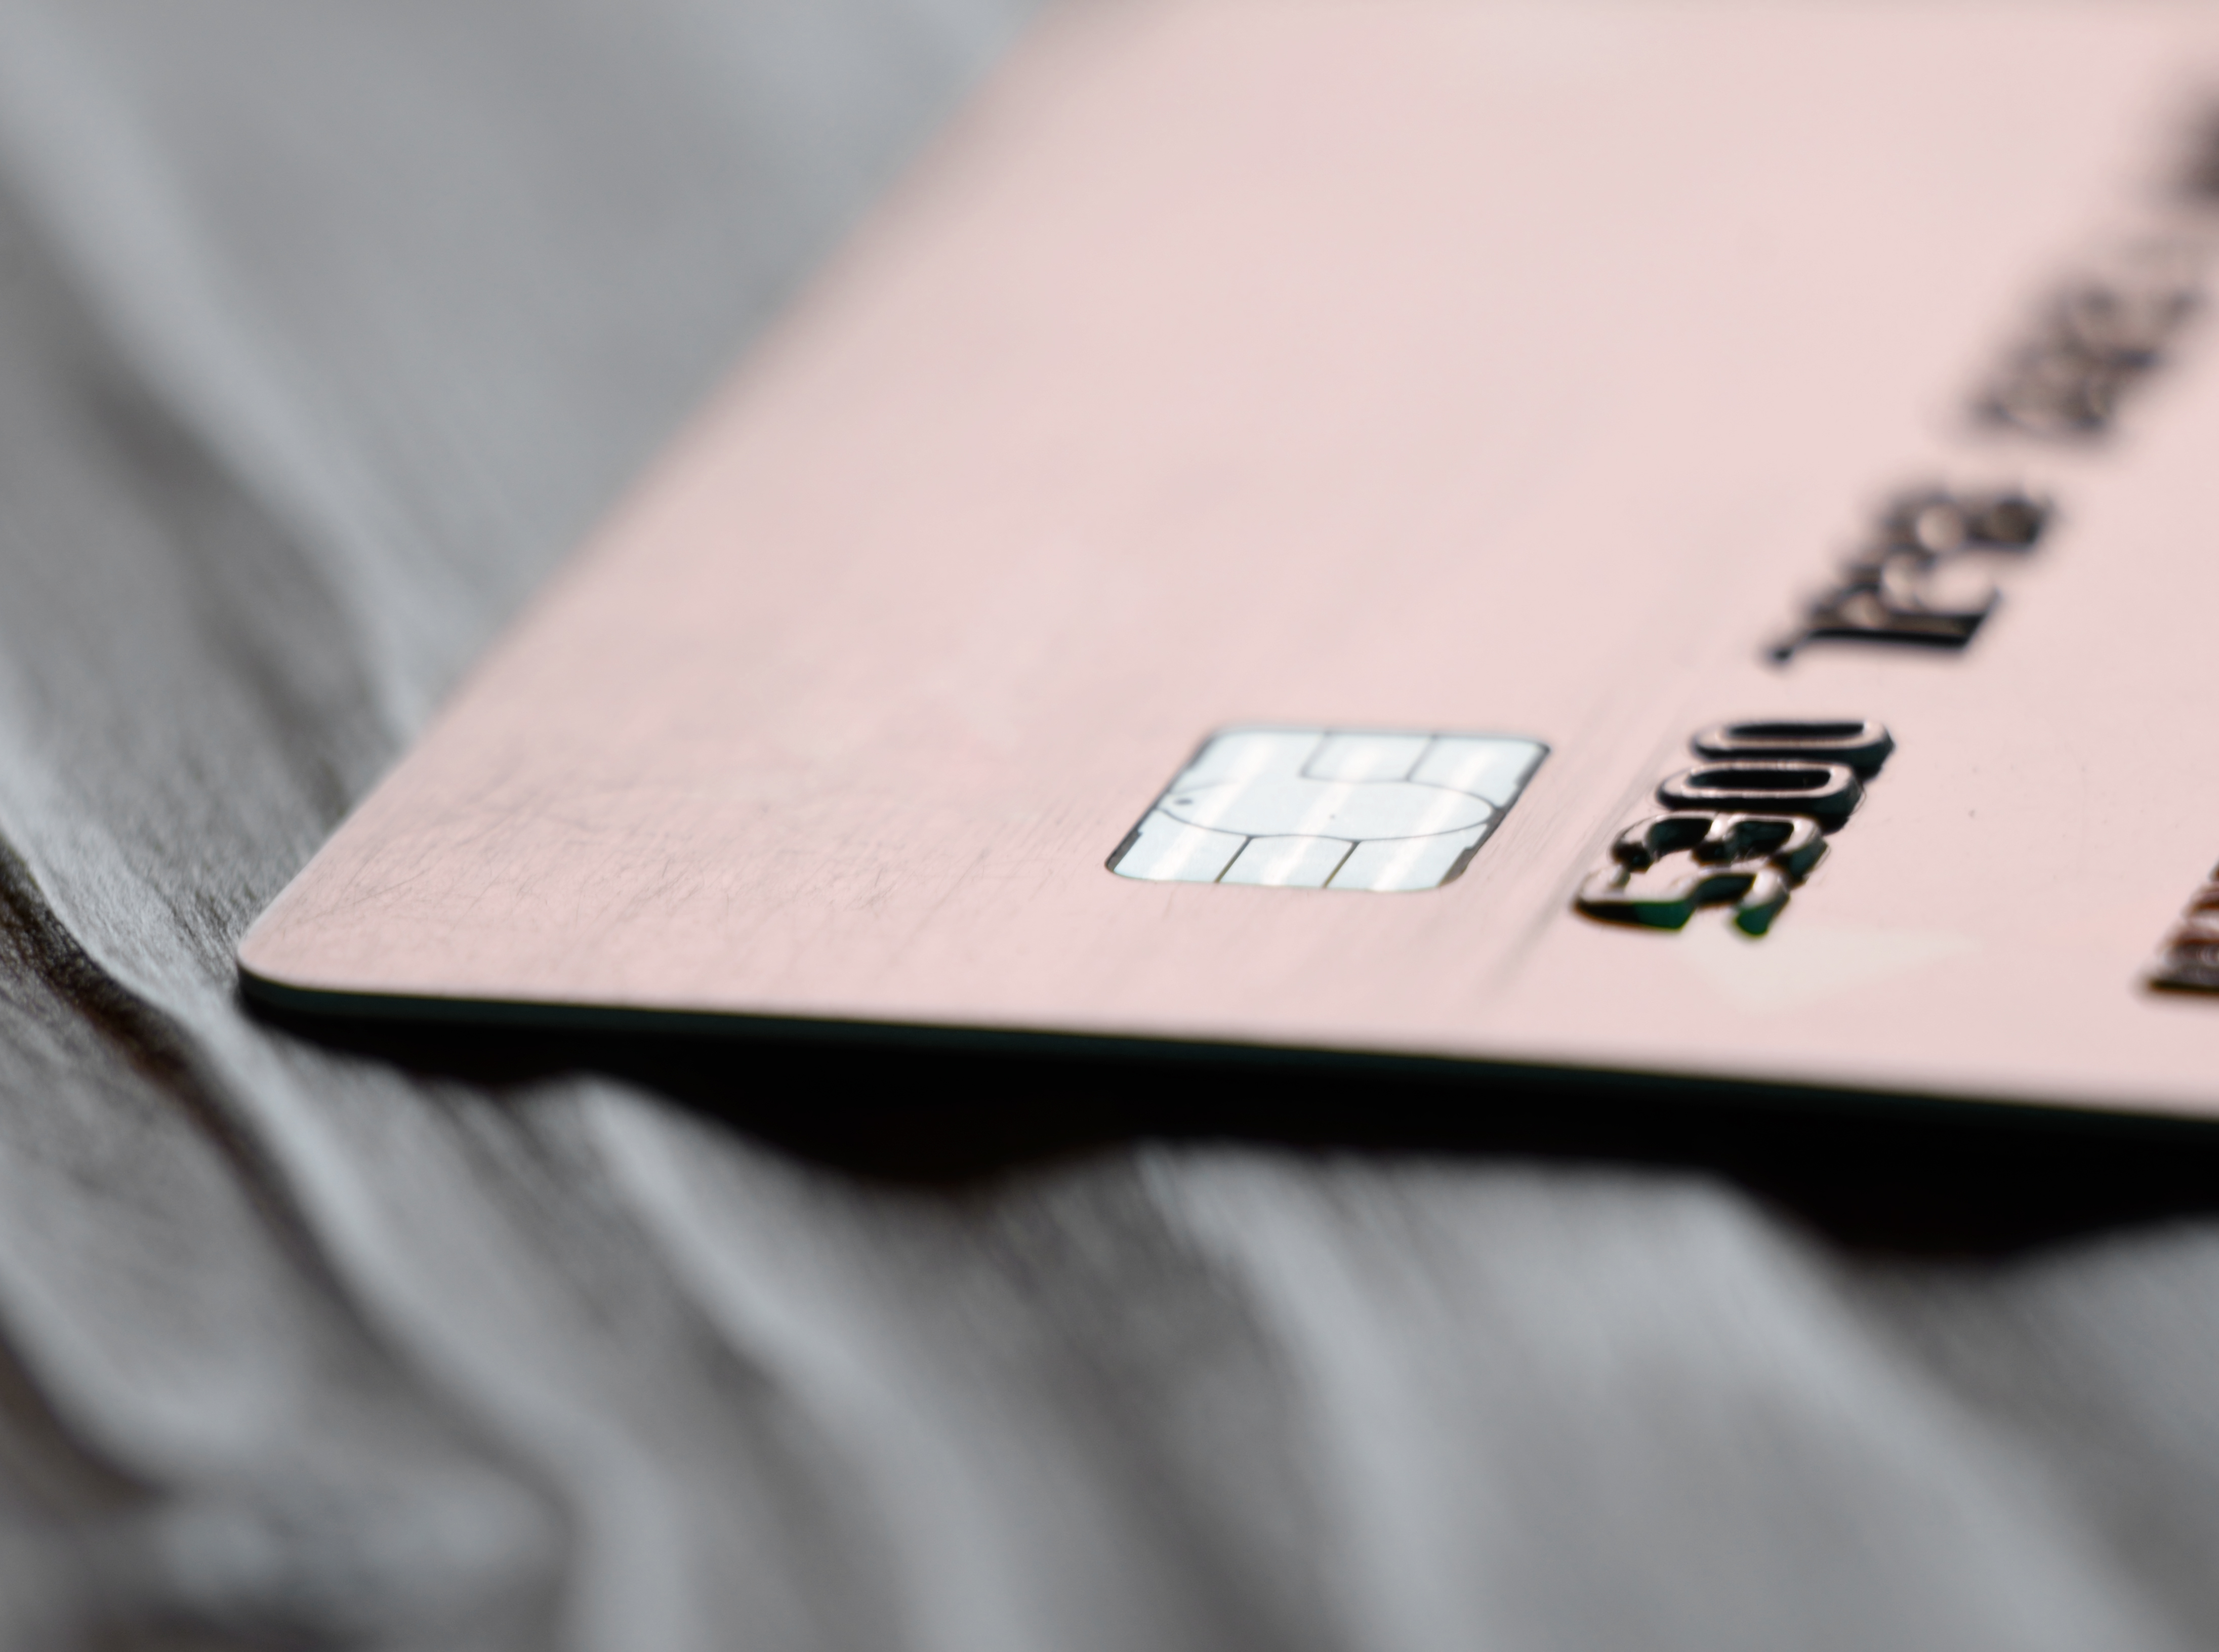 Macro Photo Of Credit Or Debit Card With Space For 39QMLY4